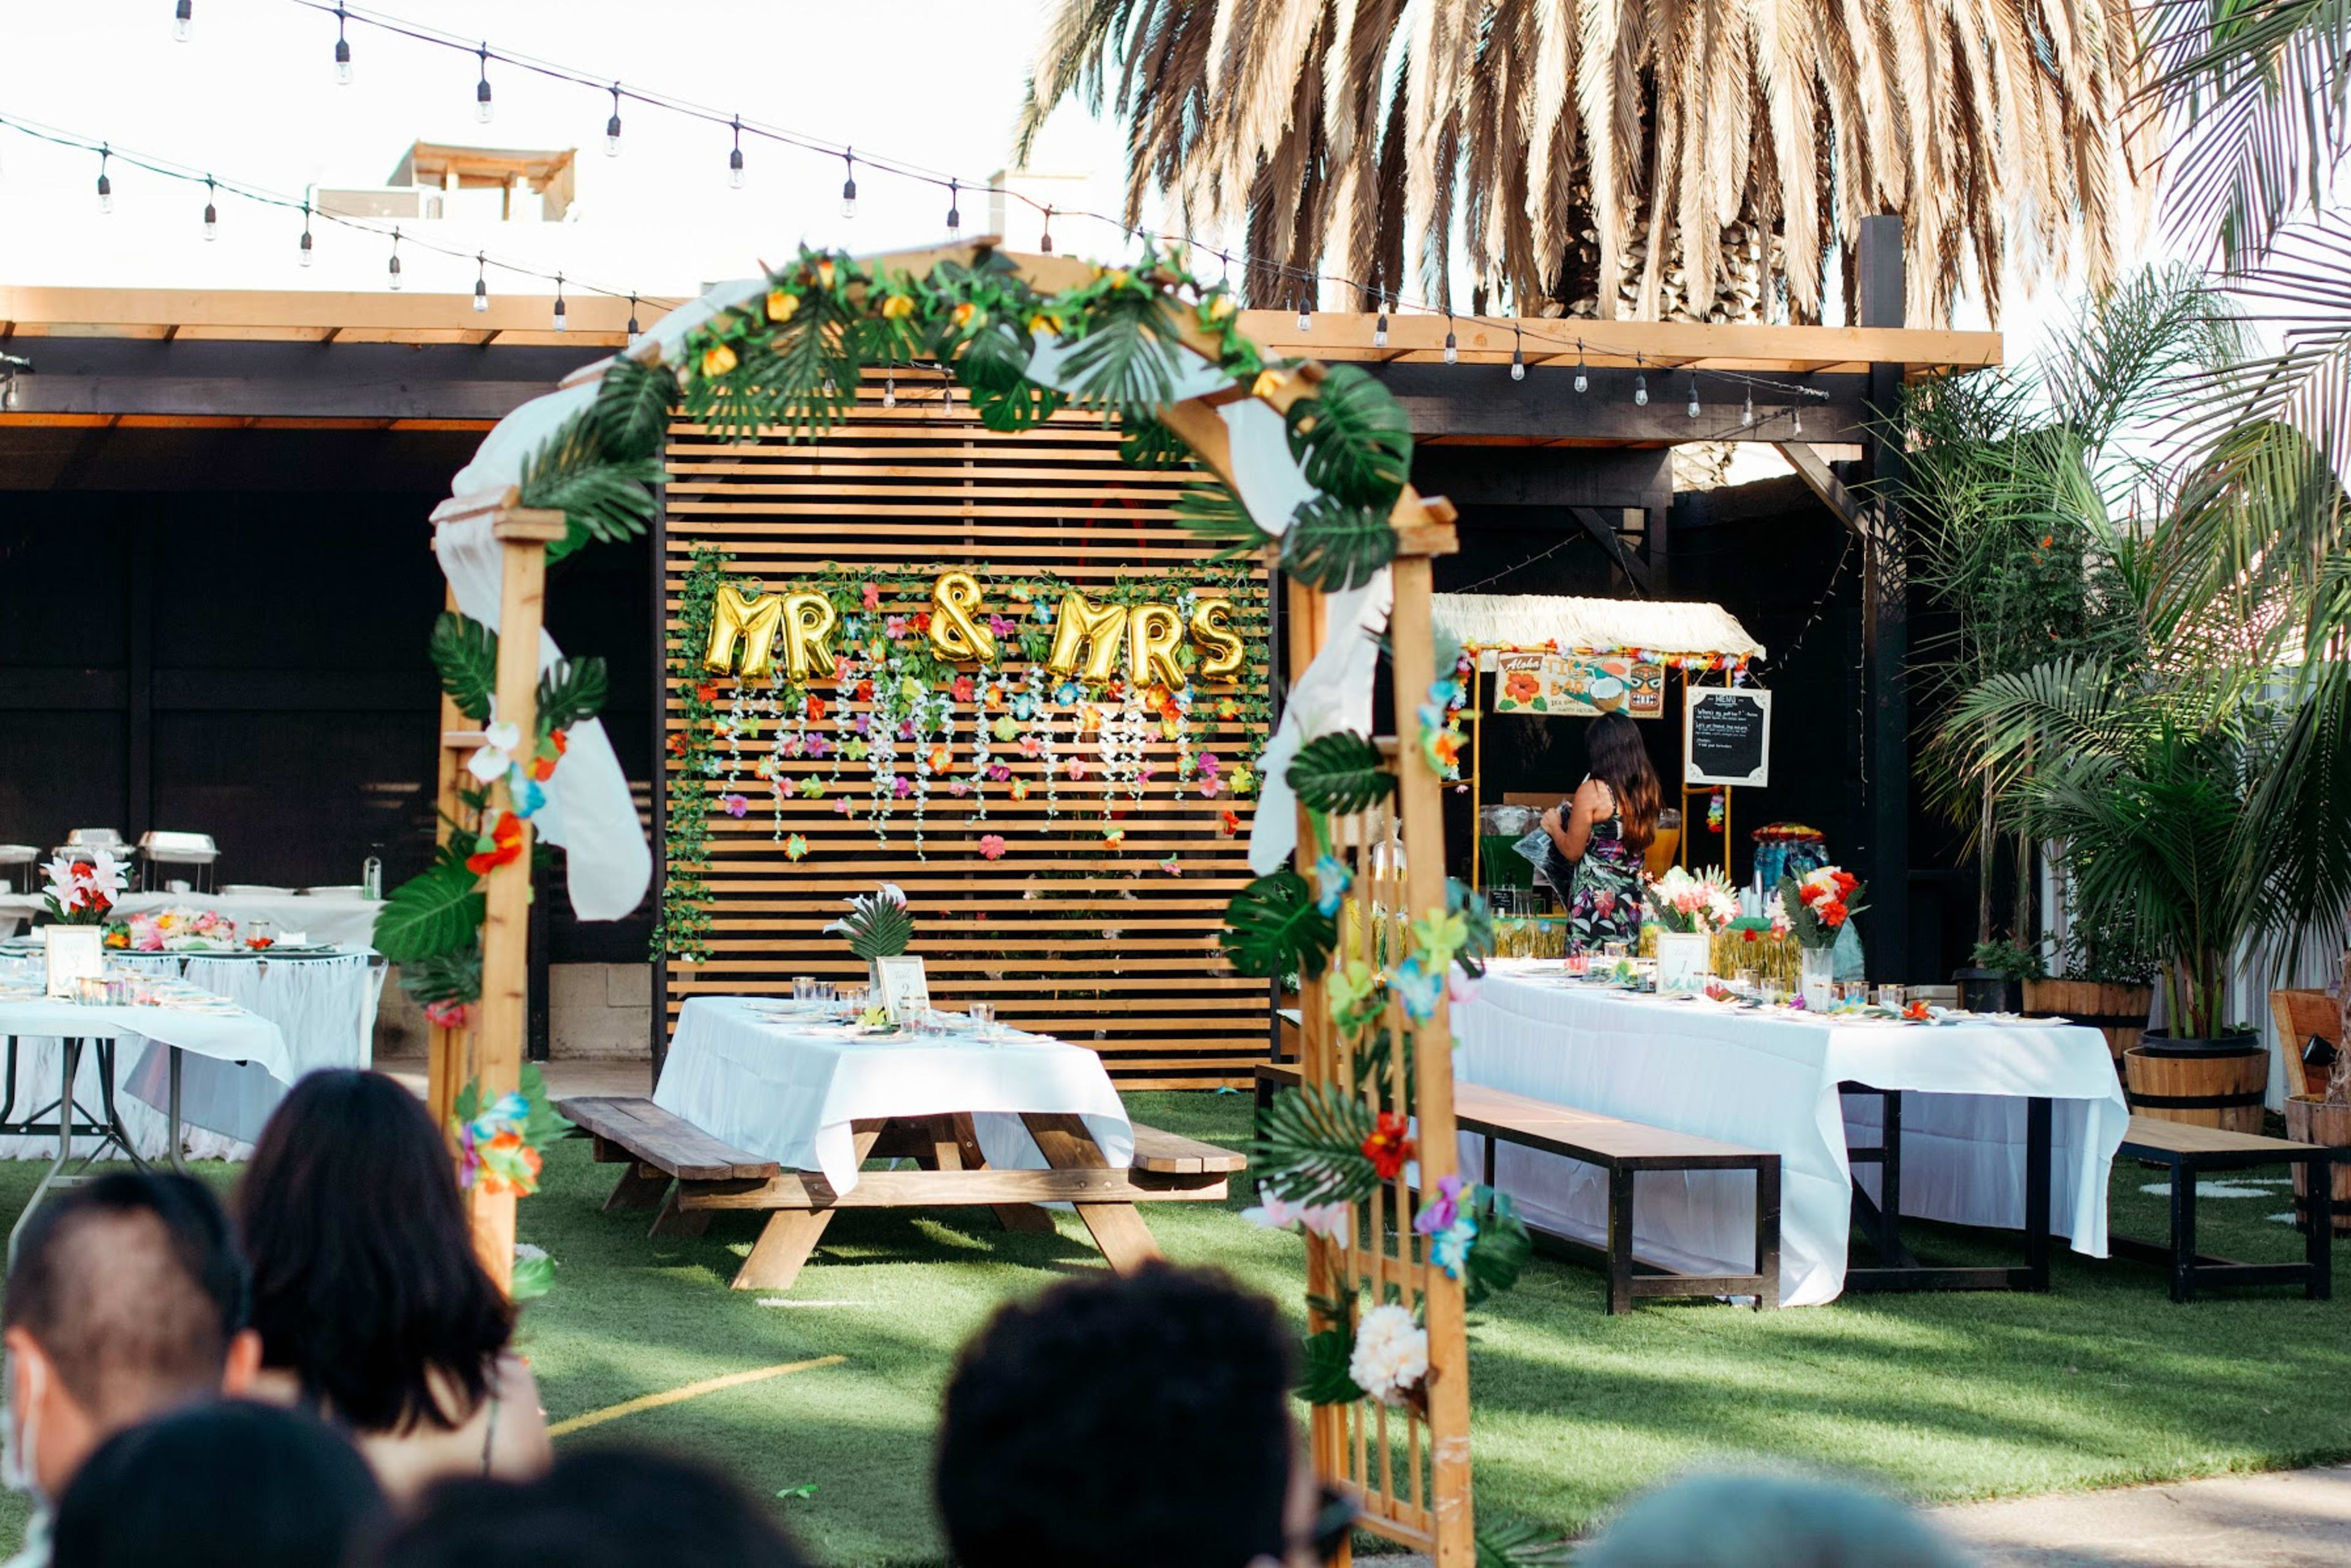 A group of people sitting outside near picnic tables for a tiki-themed wedding celebration.